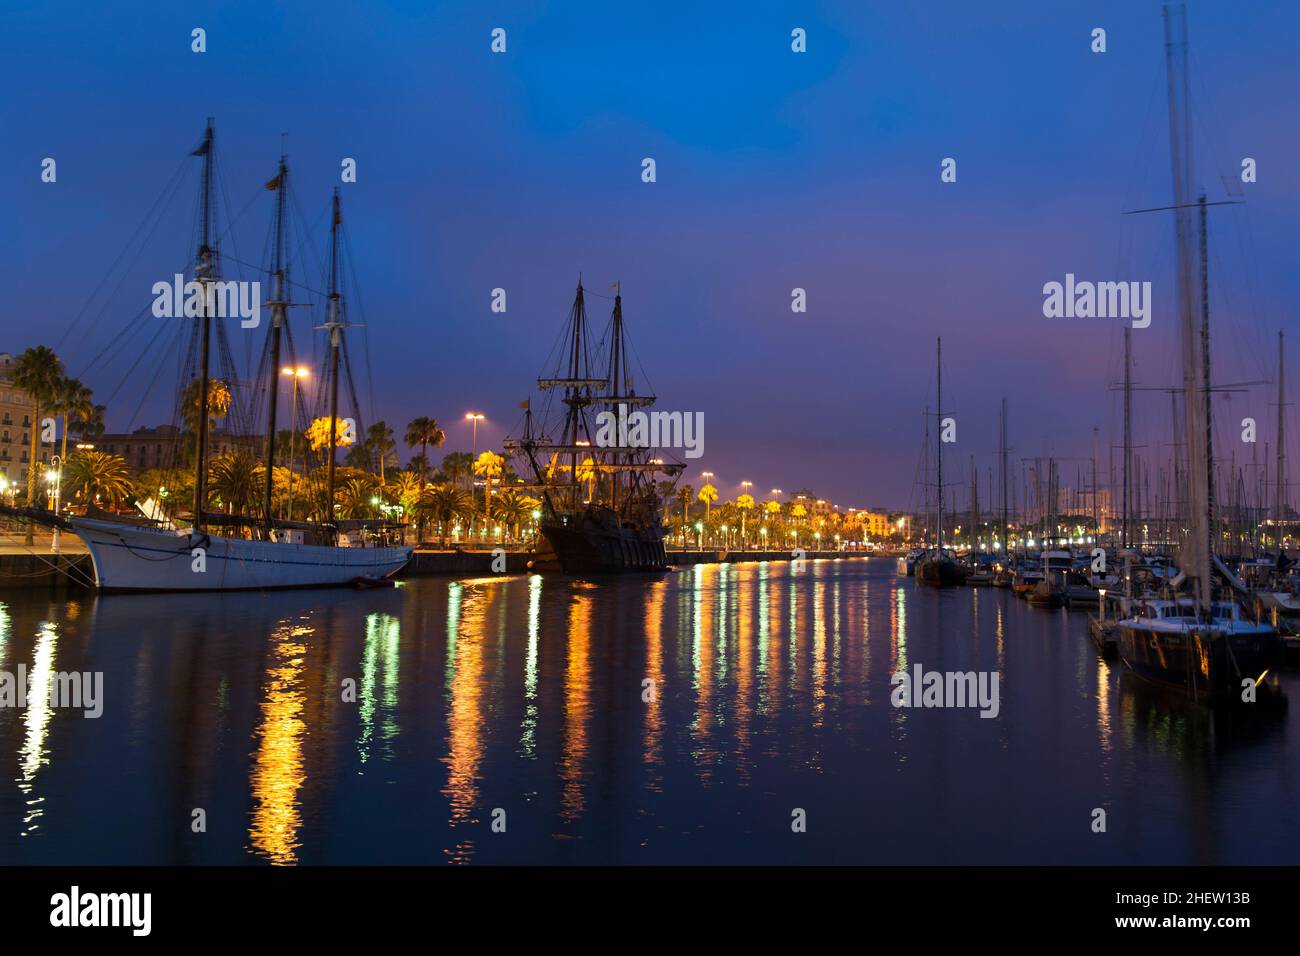 Nightscene with a rigged schooner and tall sailing ships in a peaceful calm harbour with colourful city lights from the waterfront reflected on the wa Stock Photo